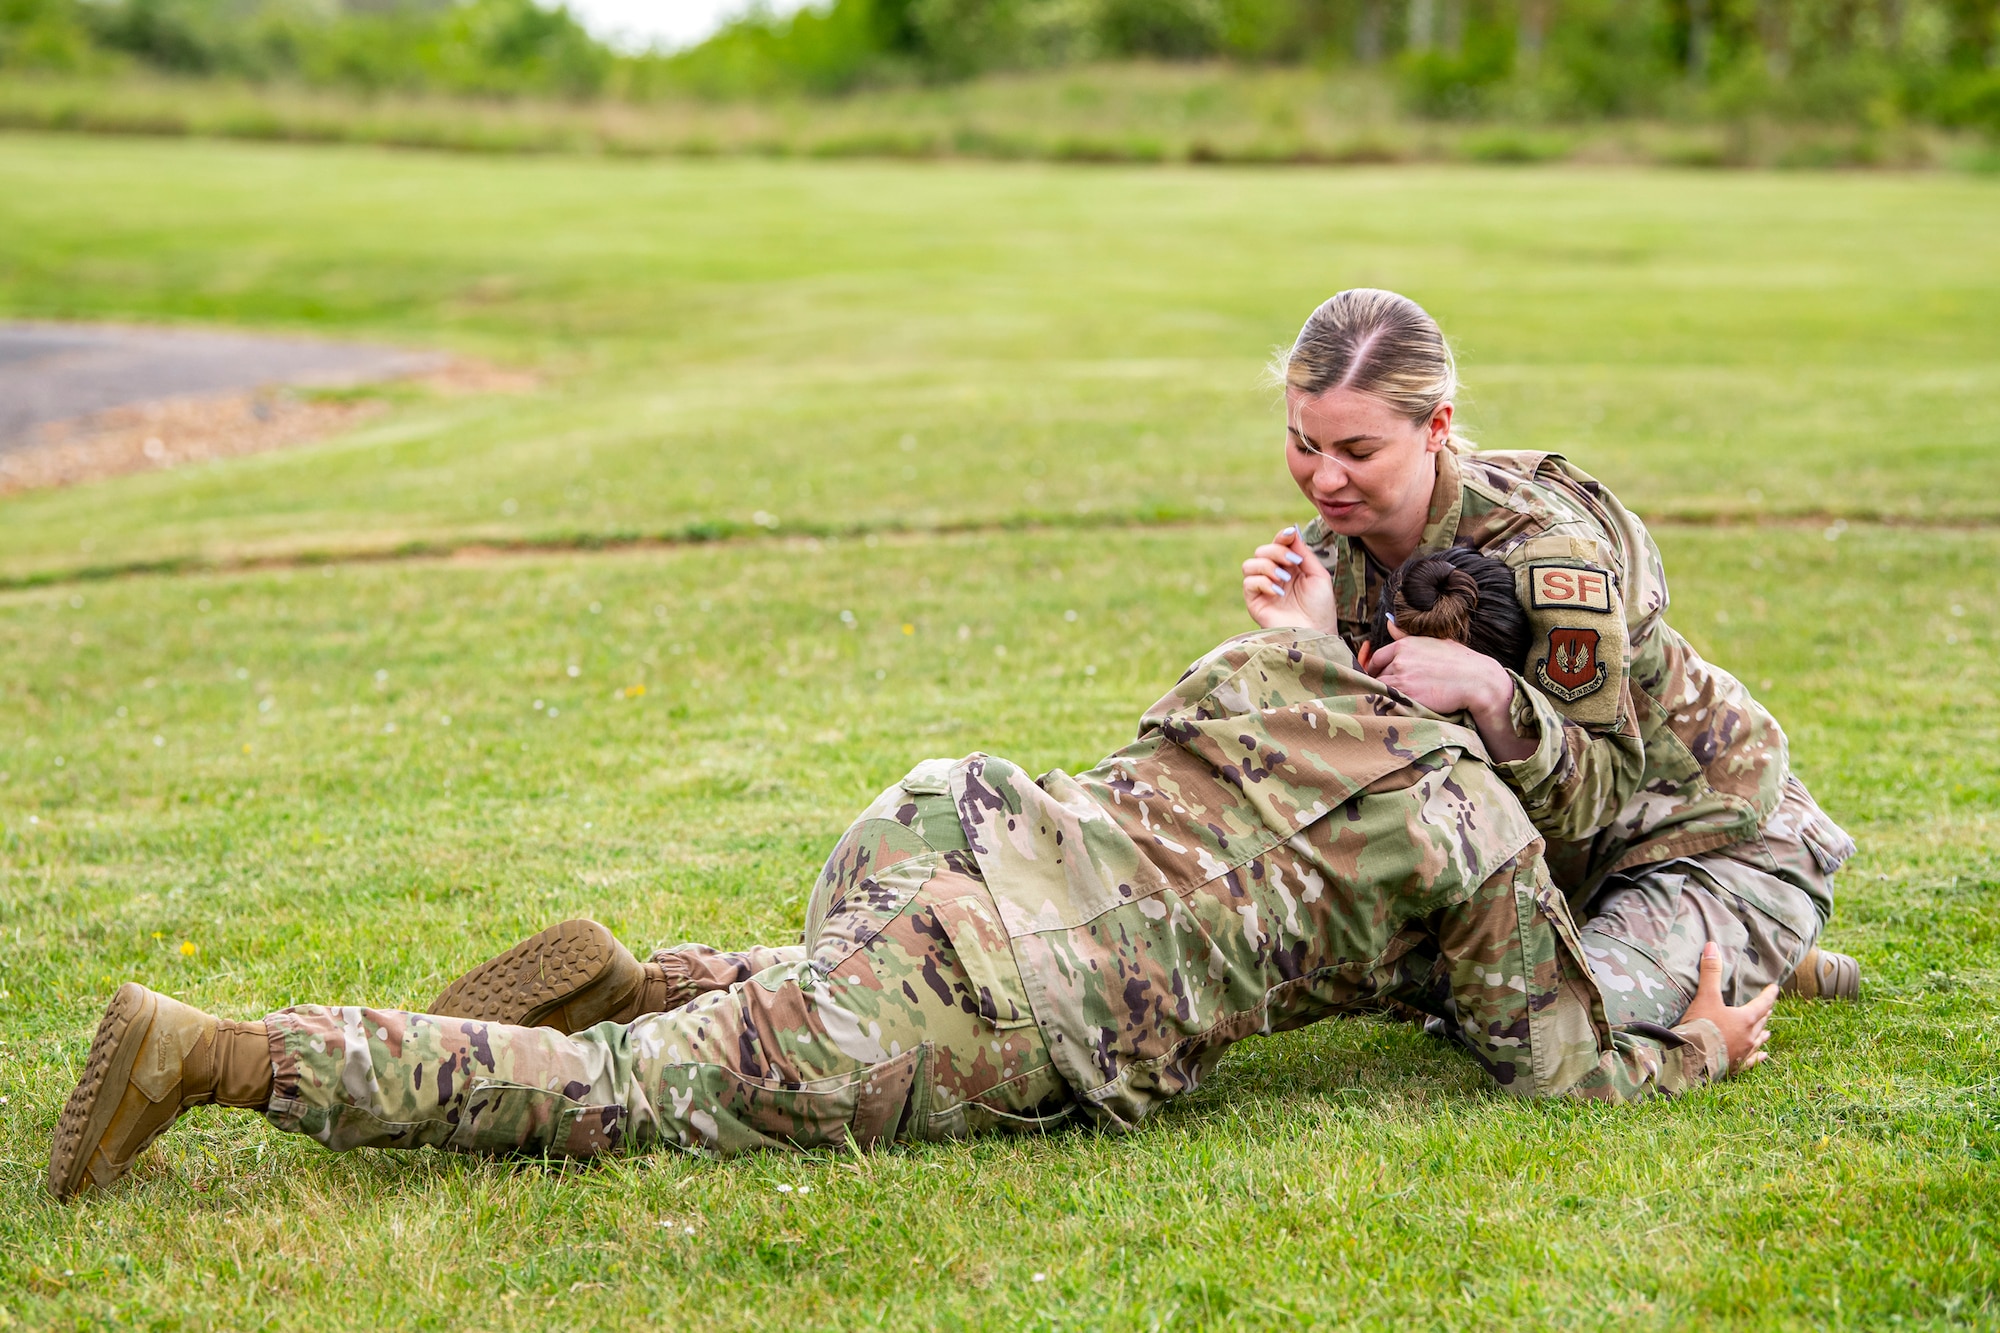 Airman 1st Class Helen Lopez, left, 423d Security Forces Squadron installation patrolman, and Airman 1st Class Sierra Capobianco, base defense operations center controller, demonstrate grappling at RAF Molesworth, England, May 10, 2022. The 423d SFS taught students from Huntingdon’s St. Peter’s school about weapons safety and self defense techniques as part of a mentorship program aimed at strengthening the relationship between the 501st Combat Support Wing and local community. (U.S. Air Force photo by Staff Sgt. Eugene Oliver)